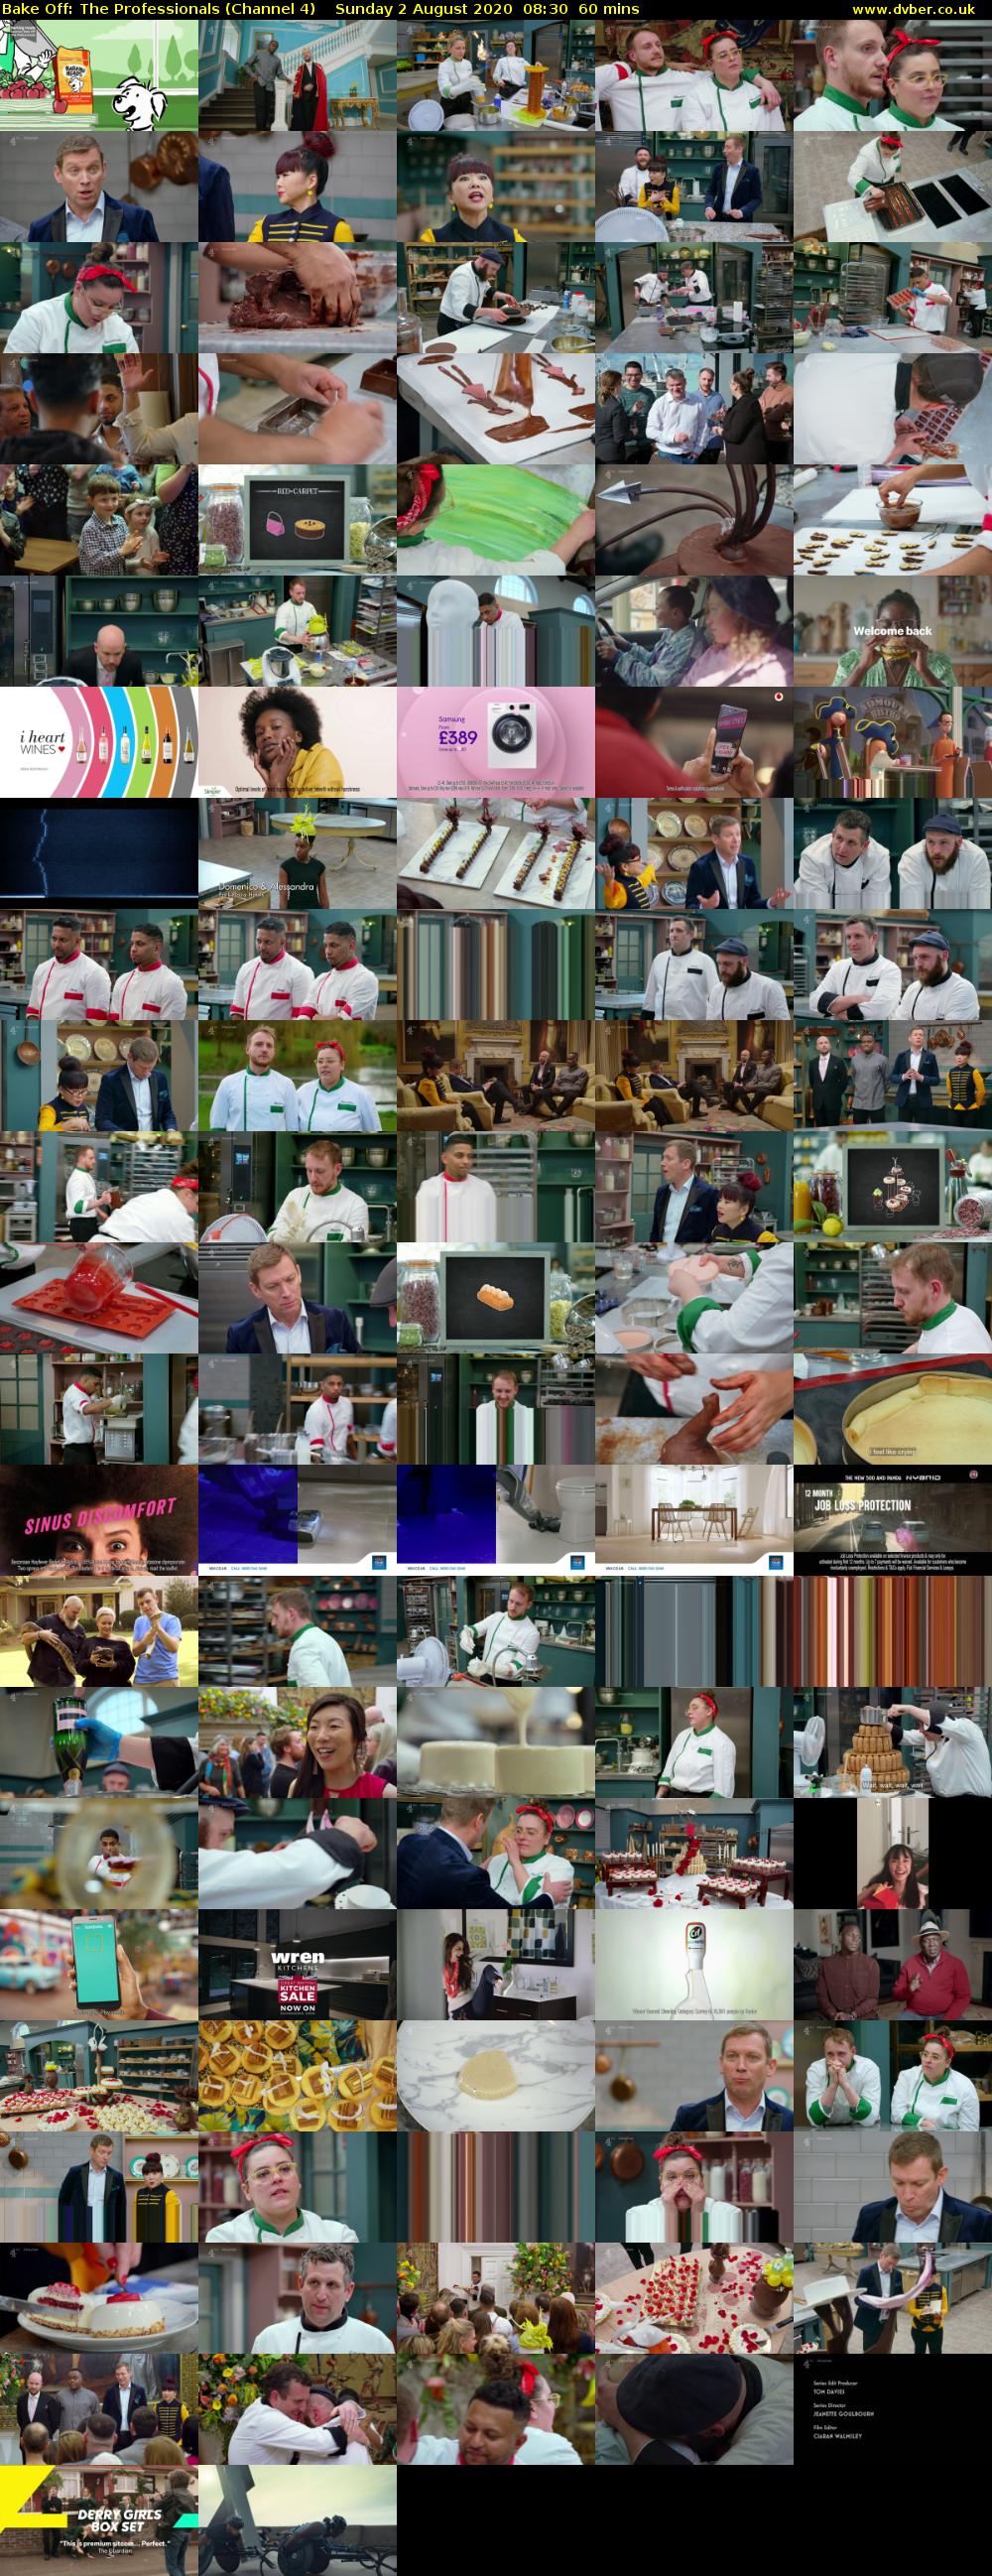 Bake Off: The Professionals (Channel 4) Sunday 2 August 2020 08:30 - 09:30